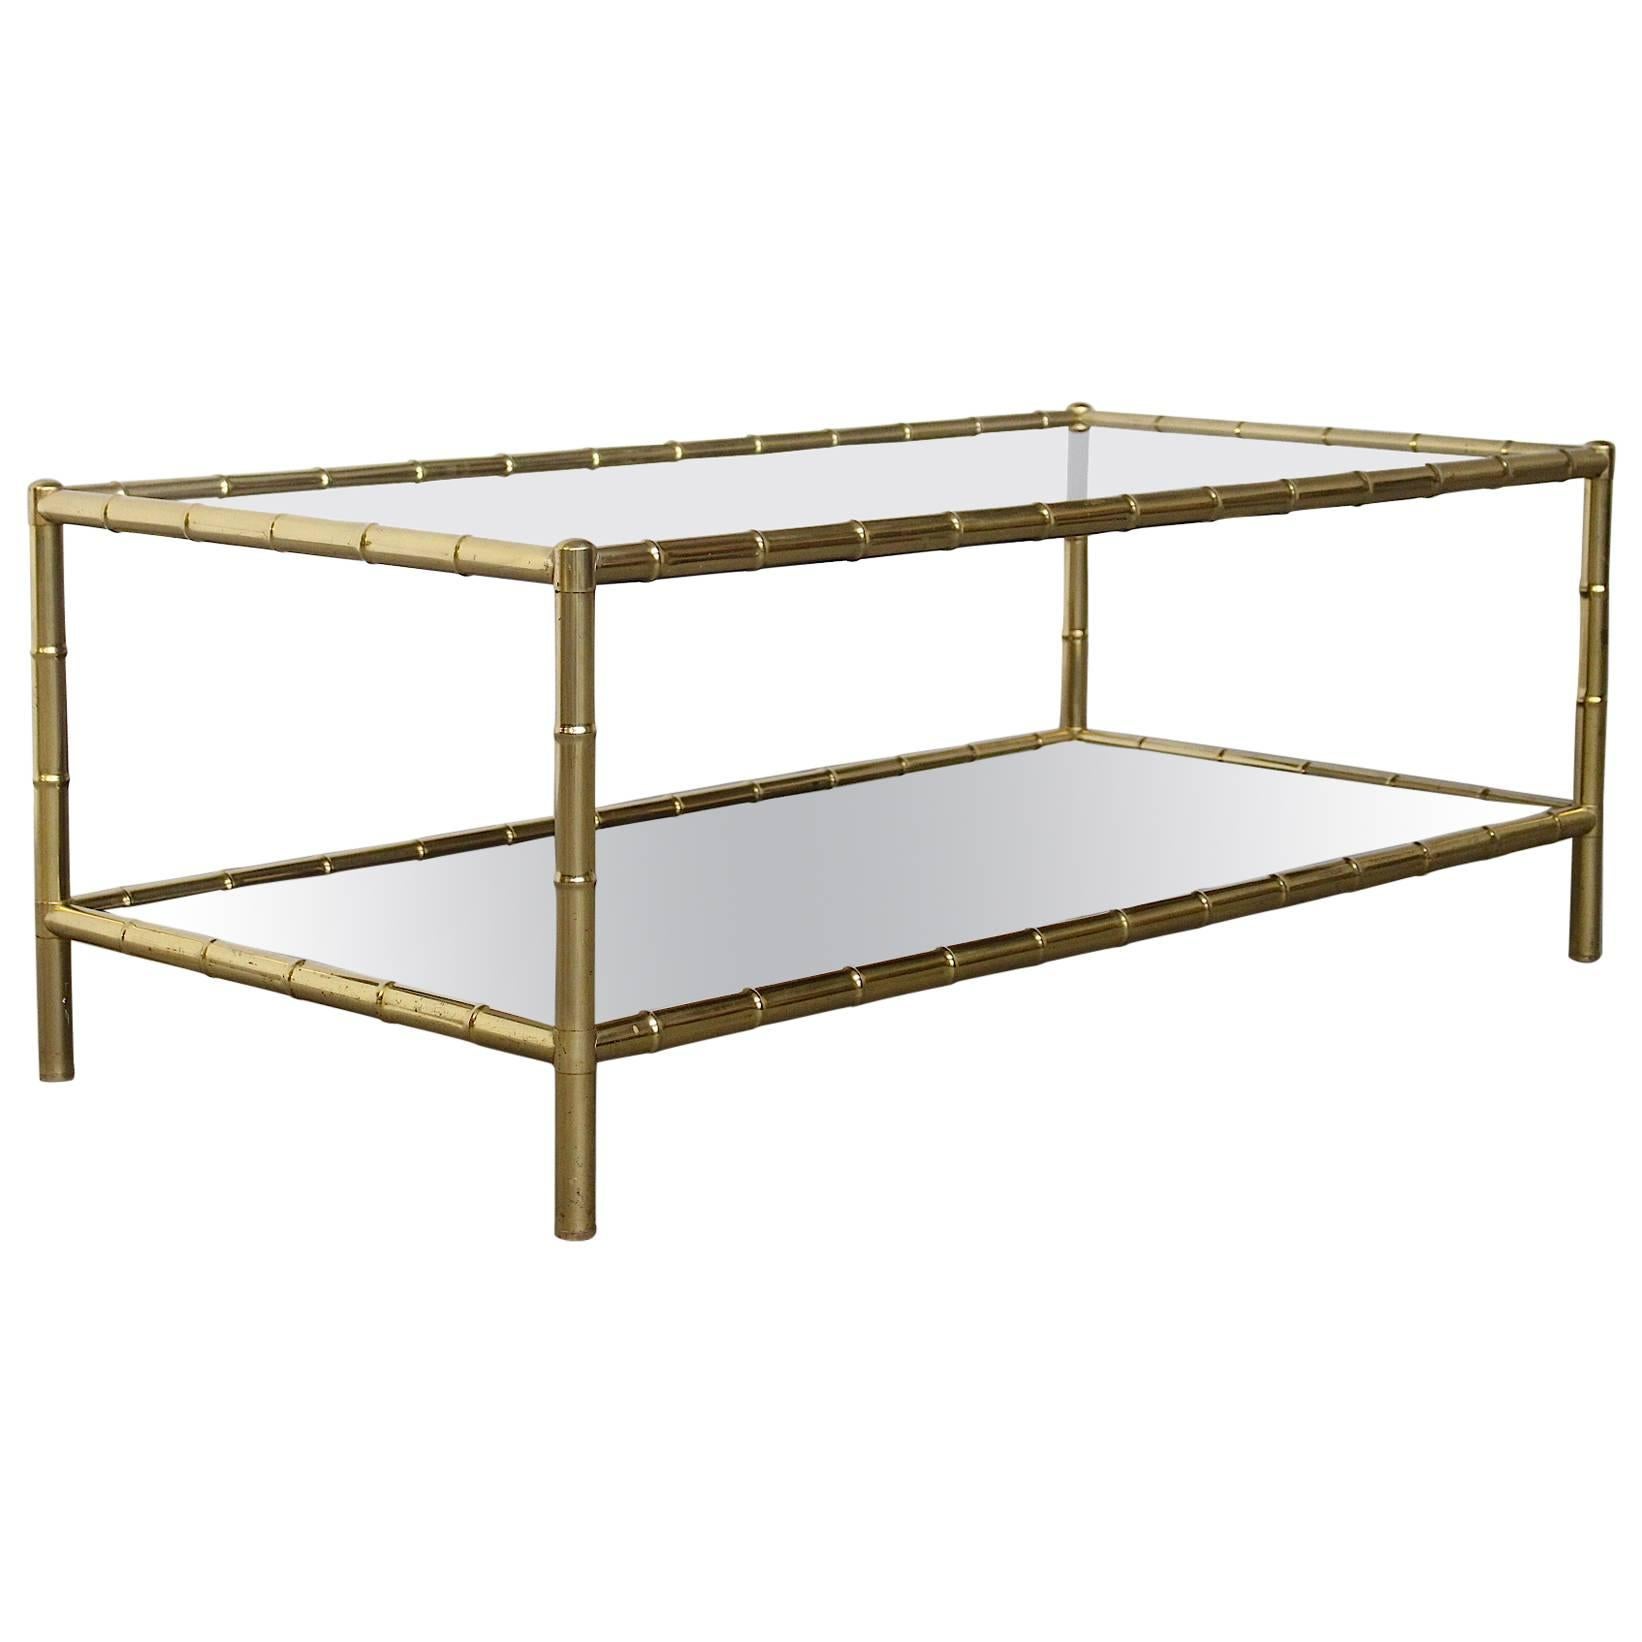 Impressive Two-Tiered Faux Bamboo Coffee Table Jacques Adnet Maison Baques style For Sale